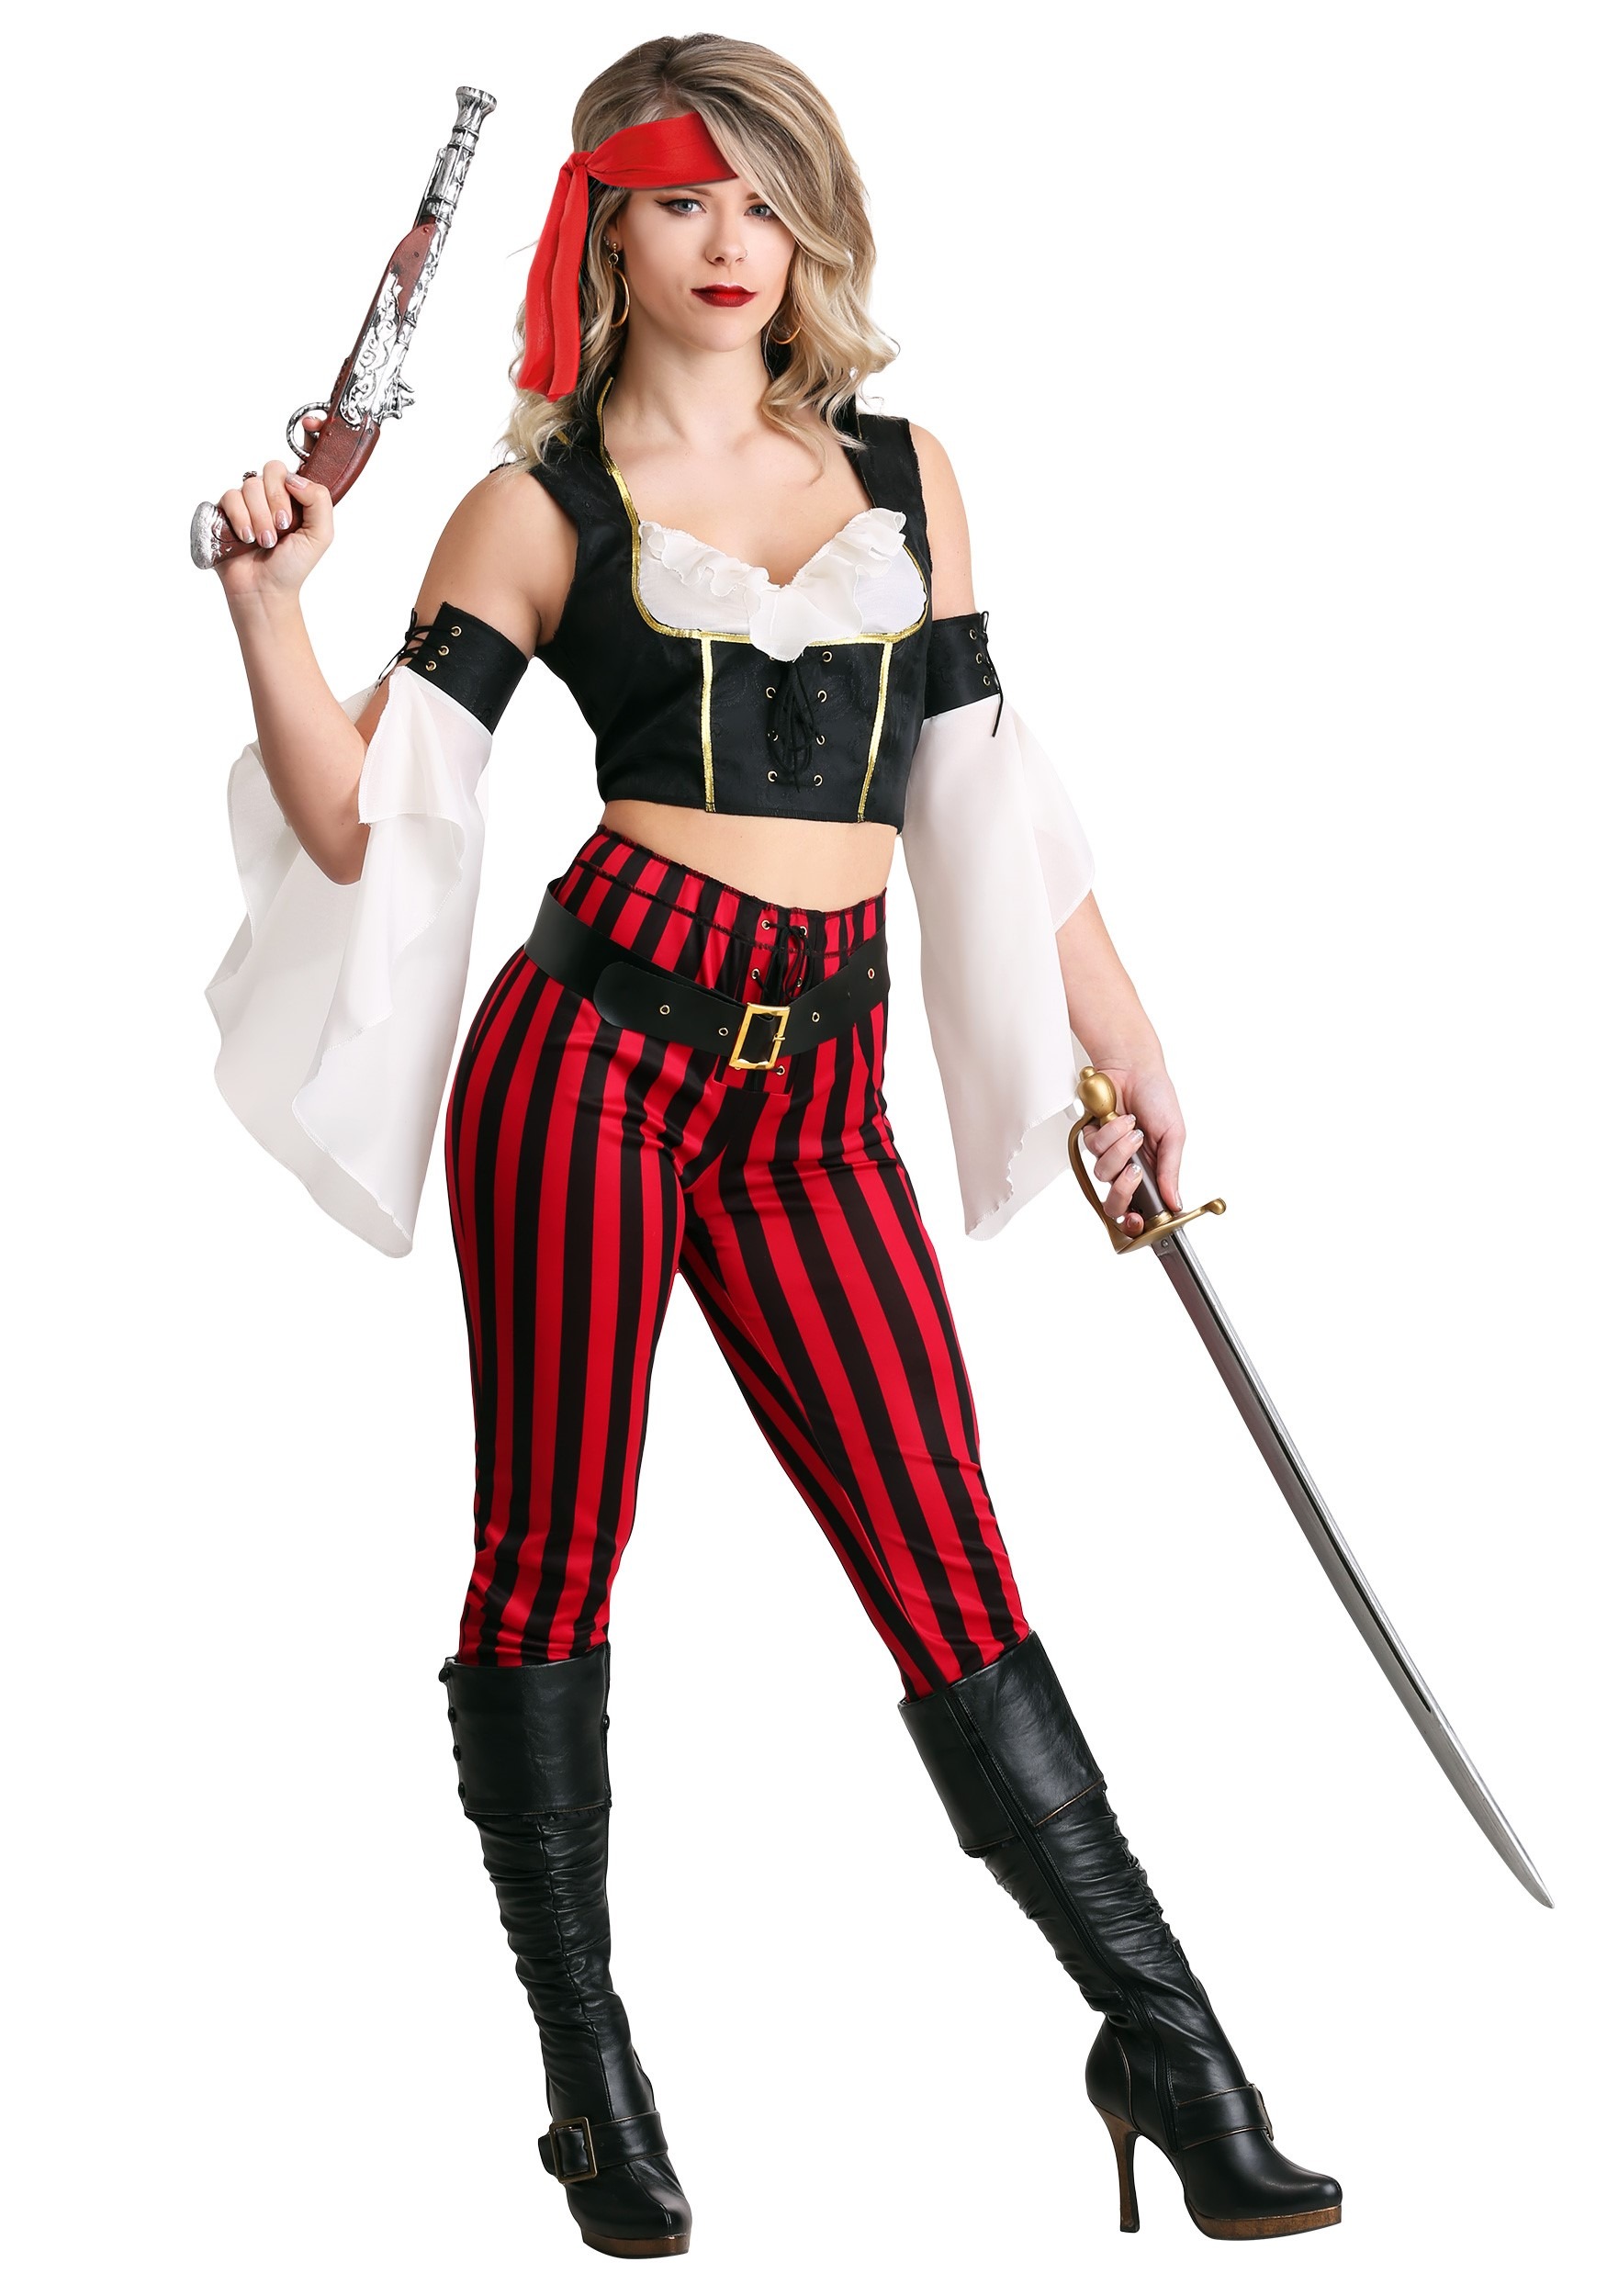 https://images.fun.com/products/52281/1-1/salty-seas-pirate-womens-costume.jpg